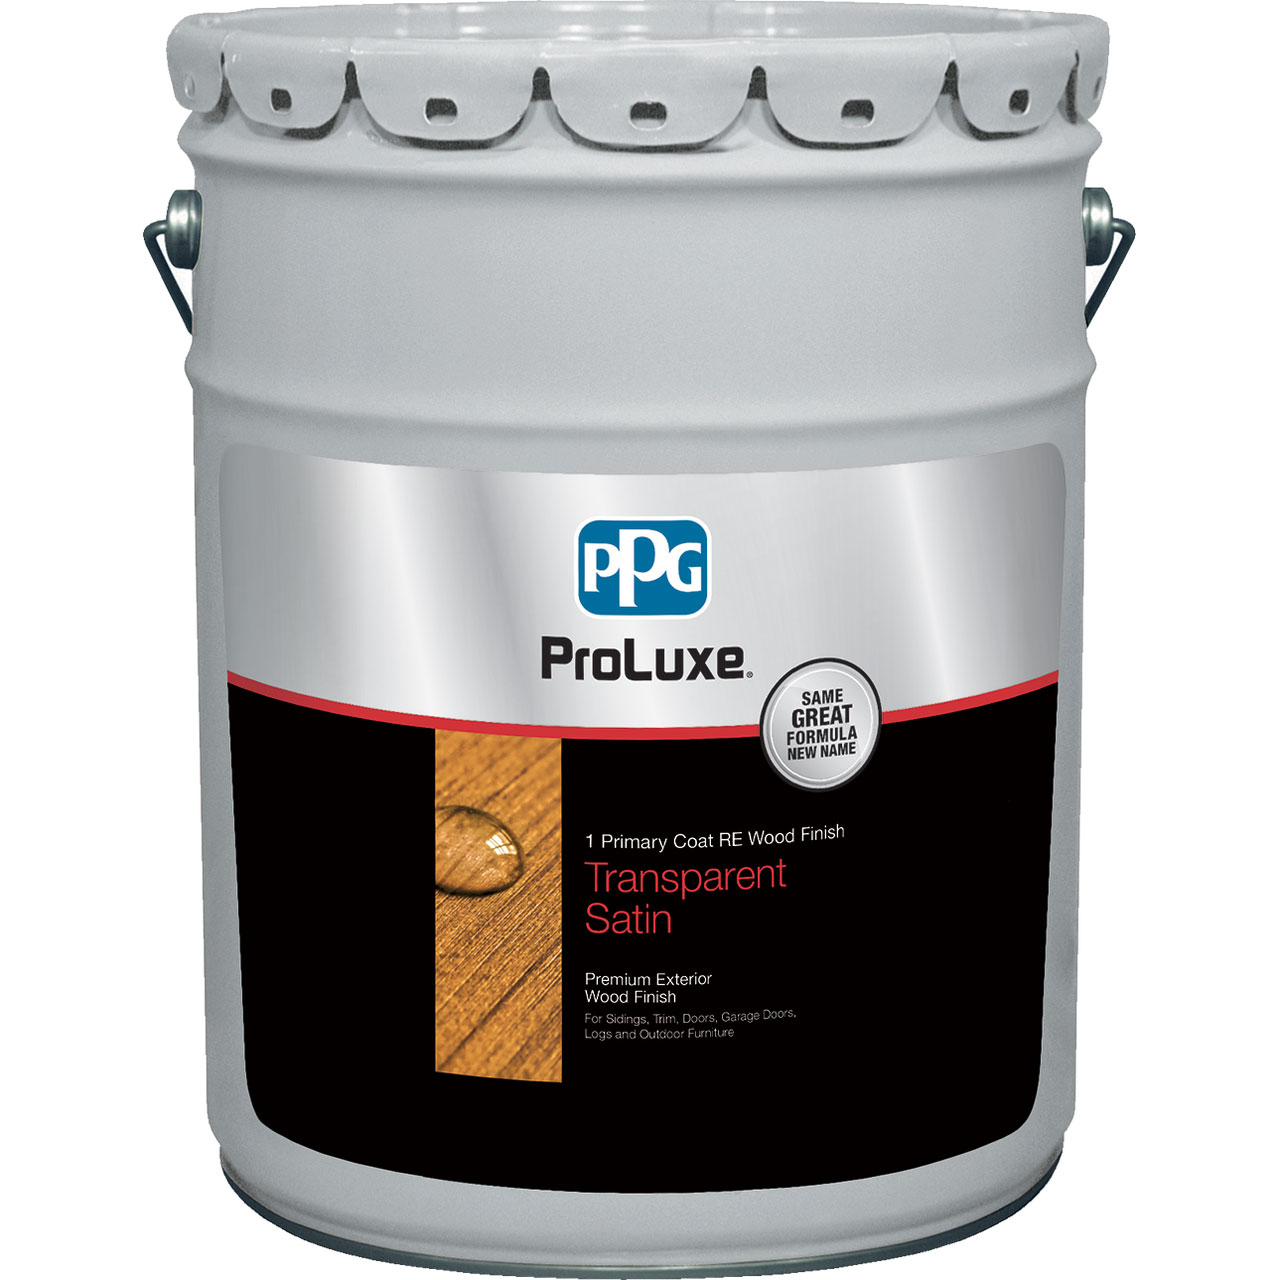 PPG Cetol 1 RE Wood Finish - Exterior Stain - 5 Gallons, Translucent - 078 Natural